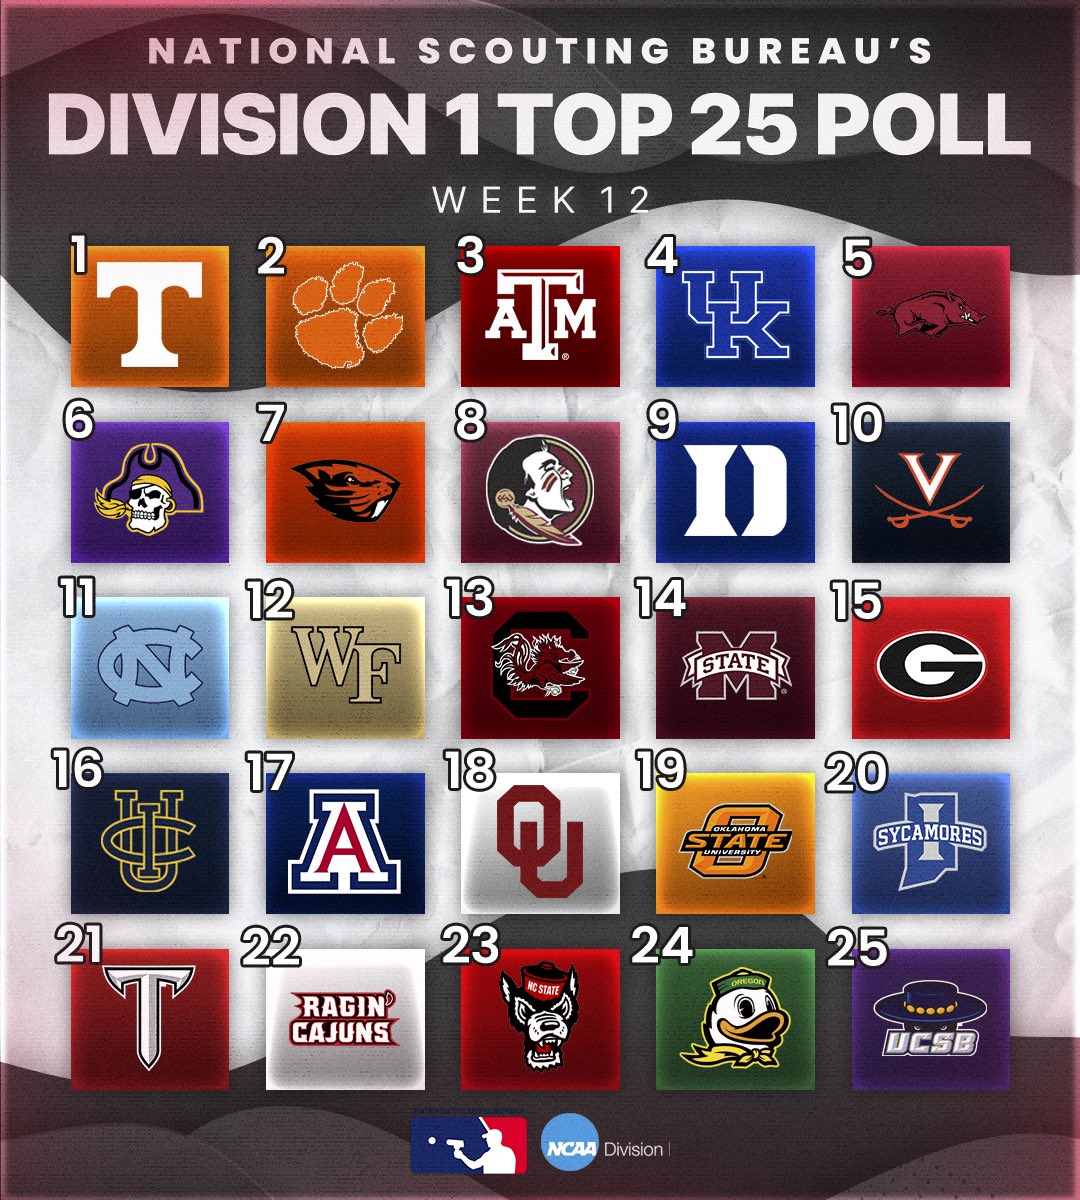 The National Scouting Bureau presents the Week 12 Division 1 Top 25 Poll🚨 After Kentuckys series win over Arkansas, we see them jump ahead to the #4 spot while we see three new teams jump into the Top 25🔥: Troy Trojans: 34-16 ⚔️ Oregon Ducks: 32-15 🦆 UCSB Gauchos: 32-12 🎩…